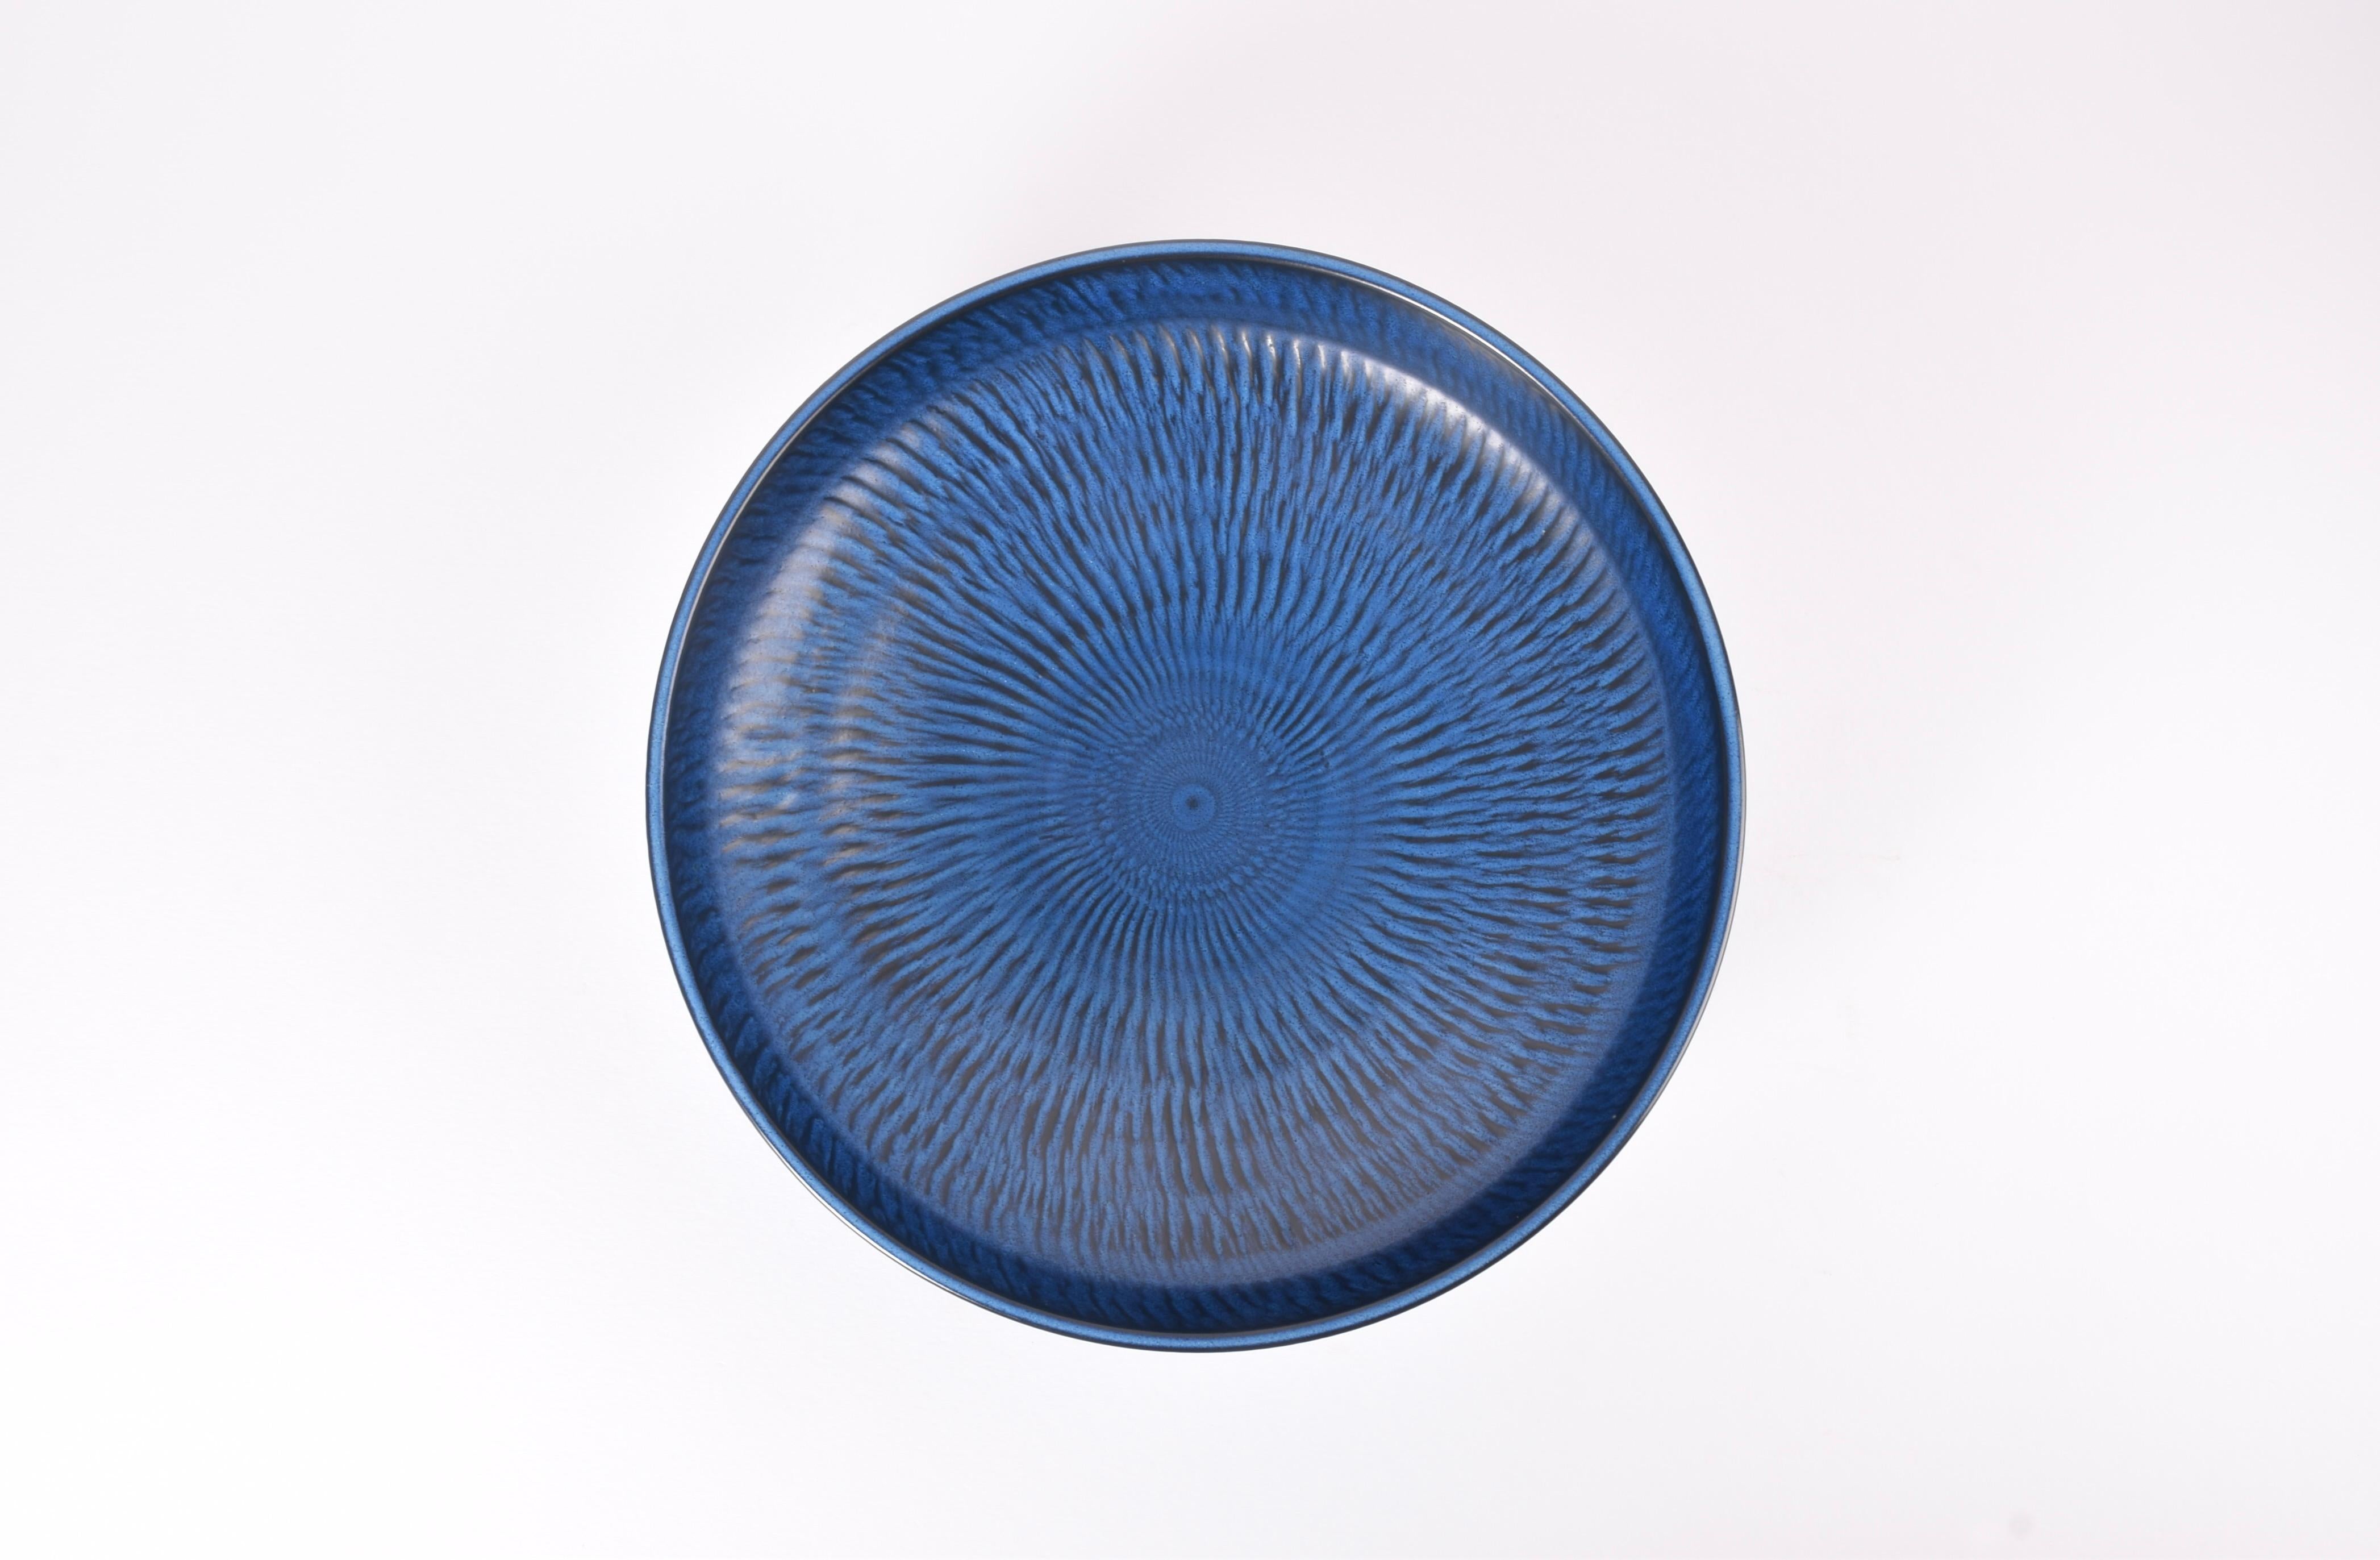 This very large circular bowl was designed by Gunnar Nylund for Nymølle and produced in Denmark, circa 1960s. It has a vivid dark blue glaze over a radiating pattern.

It would look great as a very large fruit bowl.

The bowl is a factory first